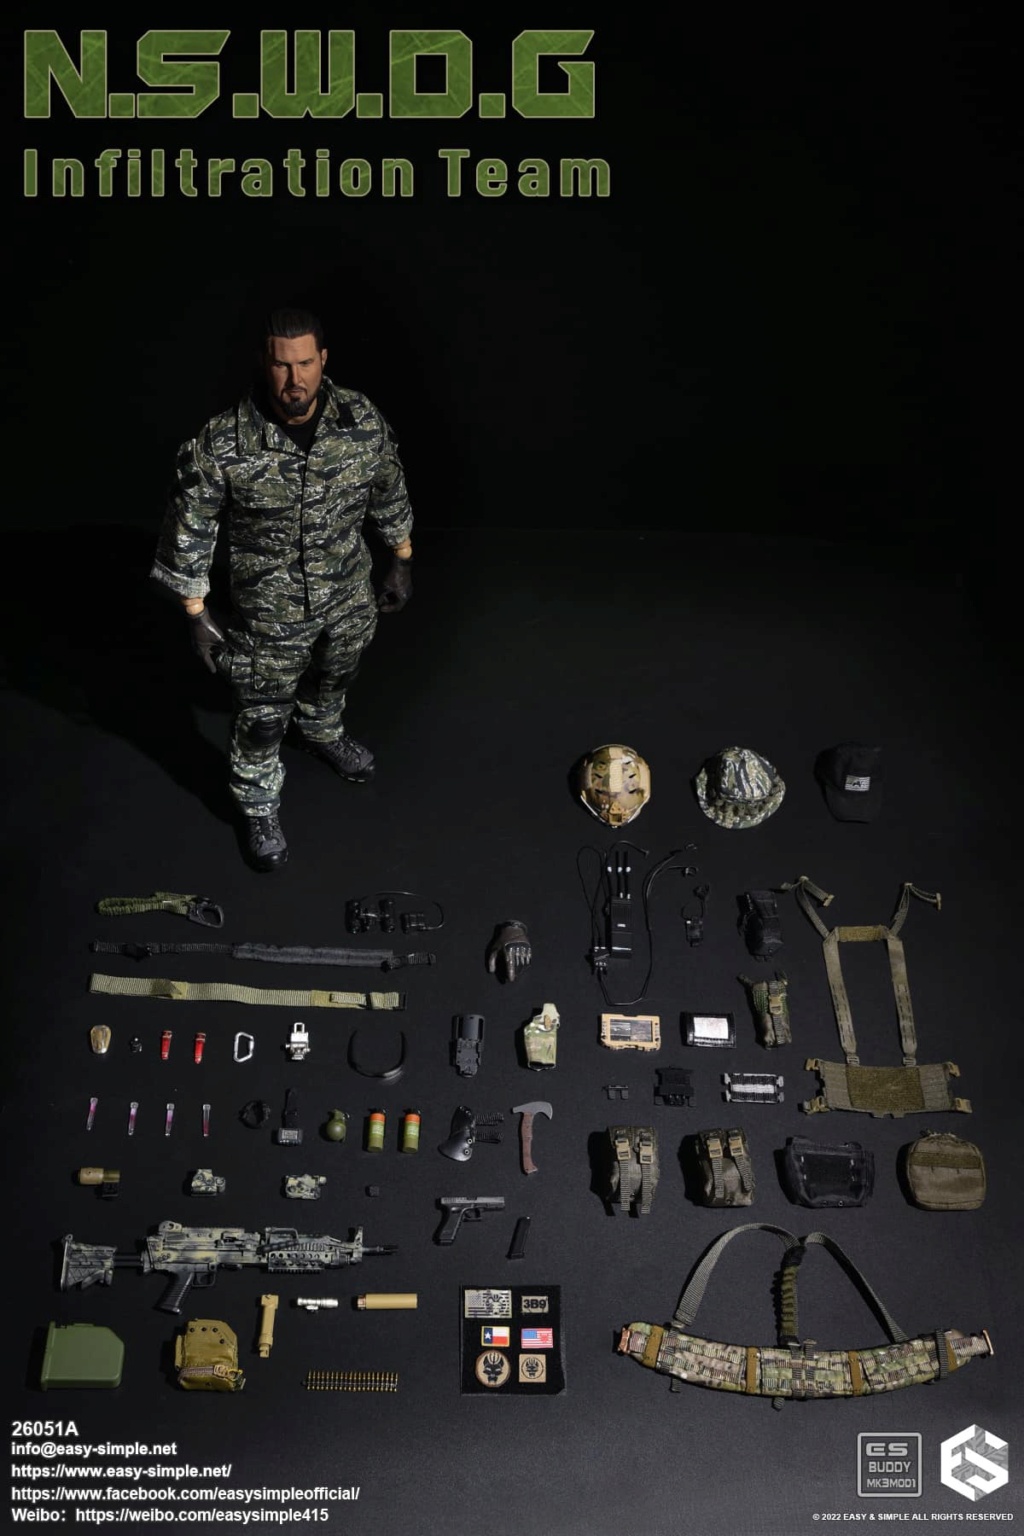 ModernMilitary - NEW PRODUCT: EASY AND SIMPLE 1/6 SCALE FIGURE: N.S.W.D.G INFILTRATION TEAM - (2 Versions) 44115